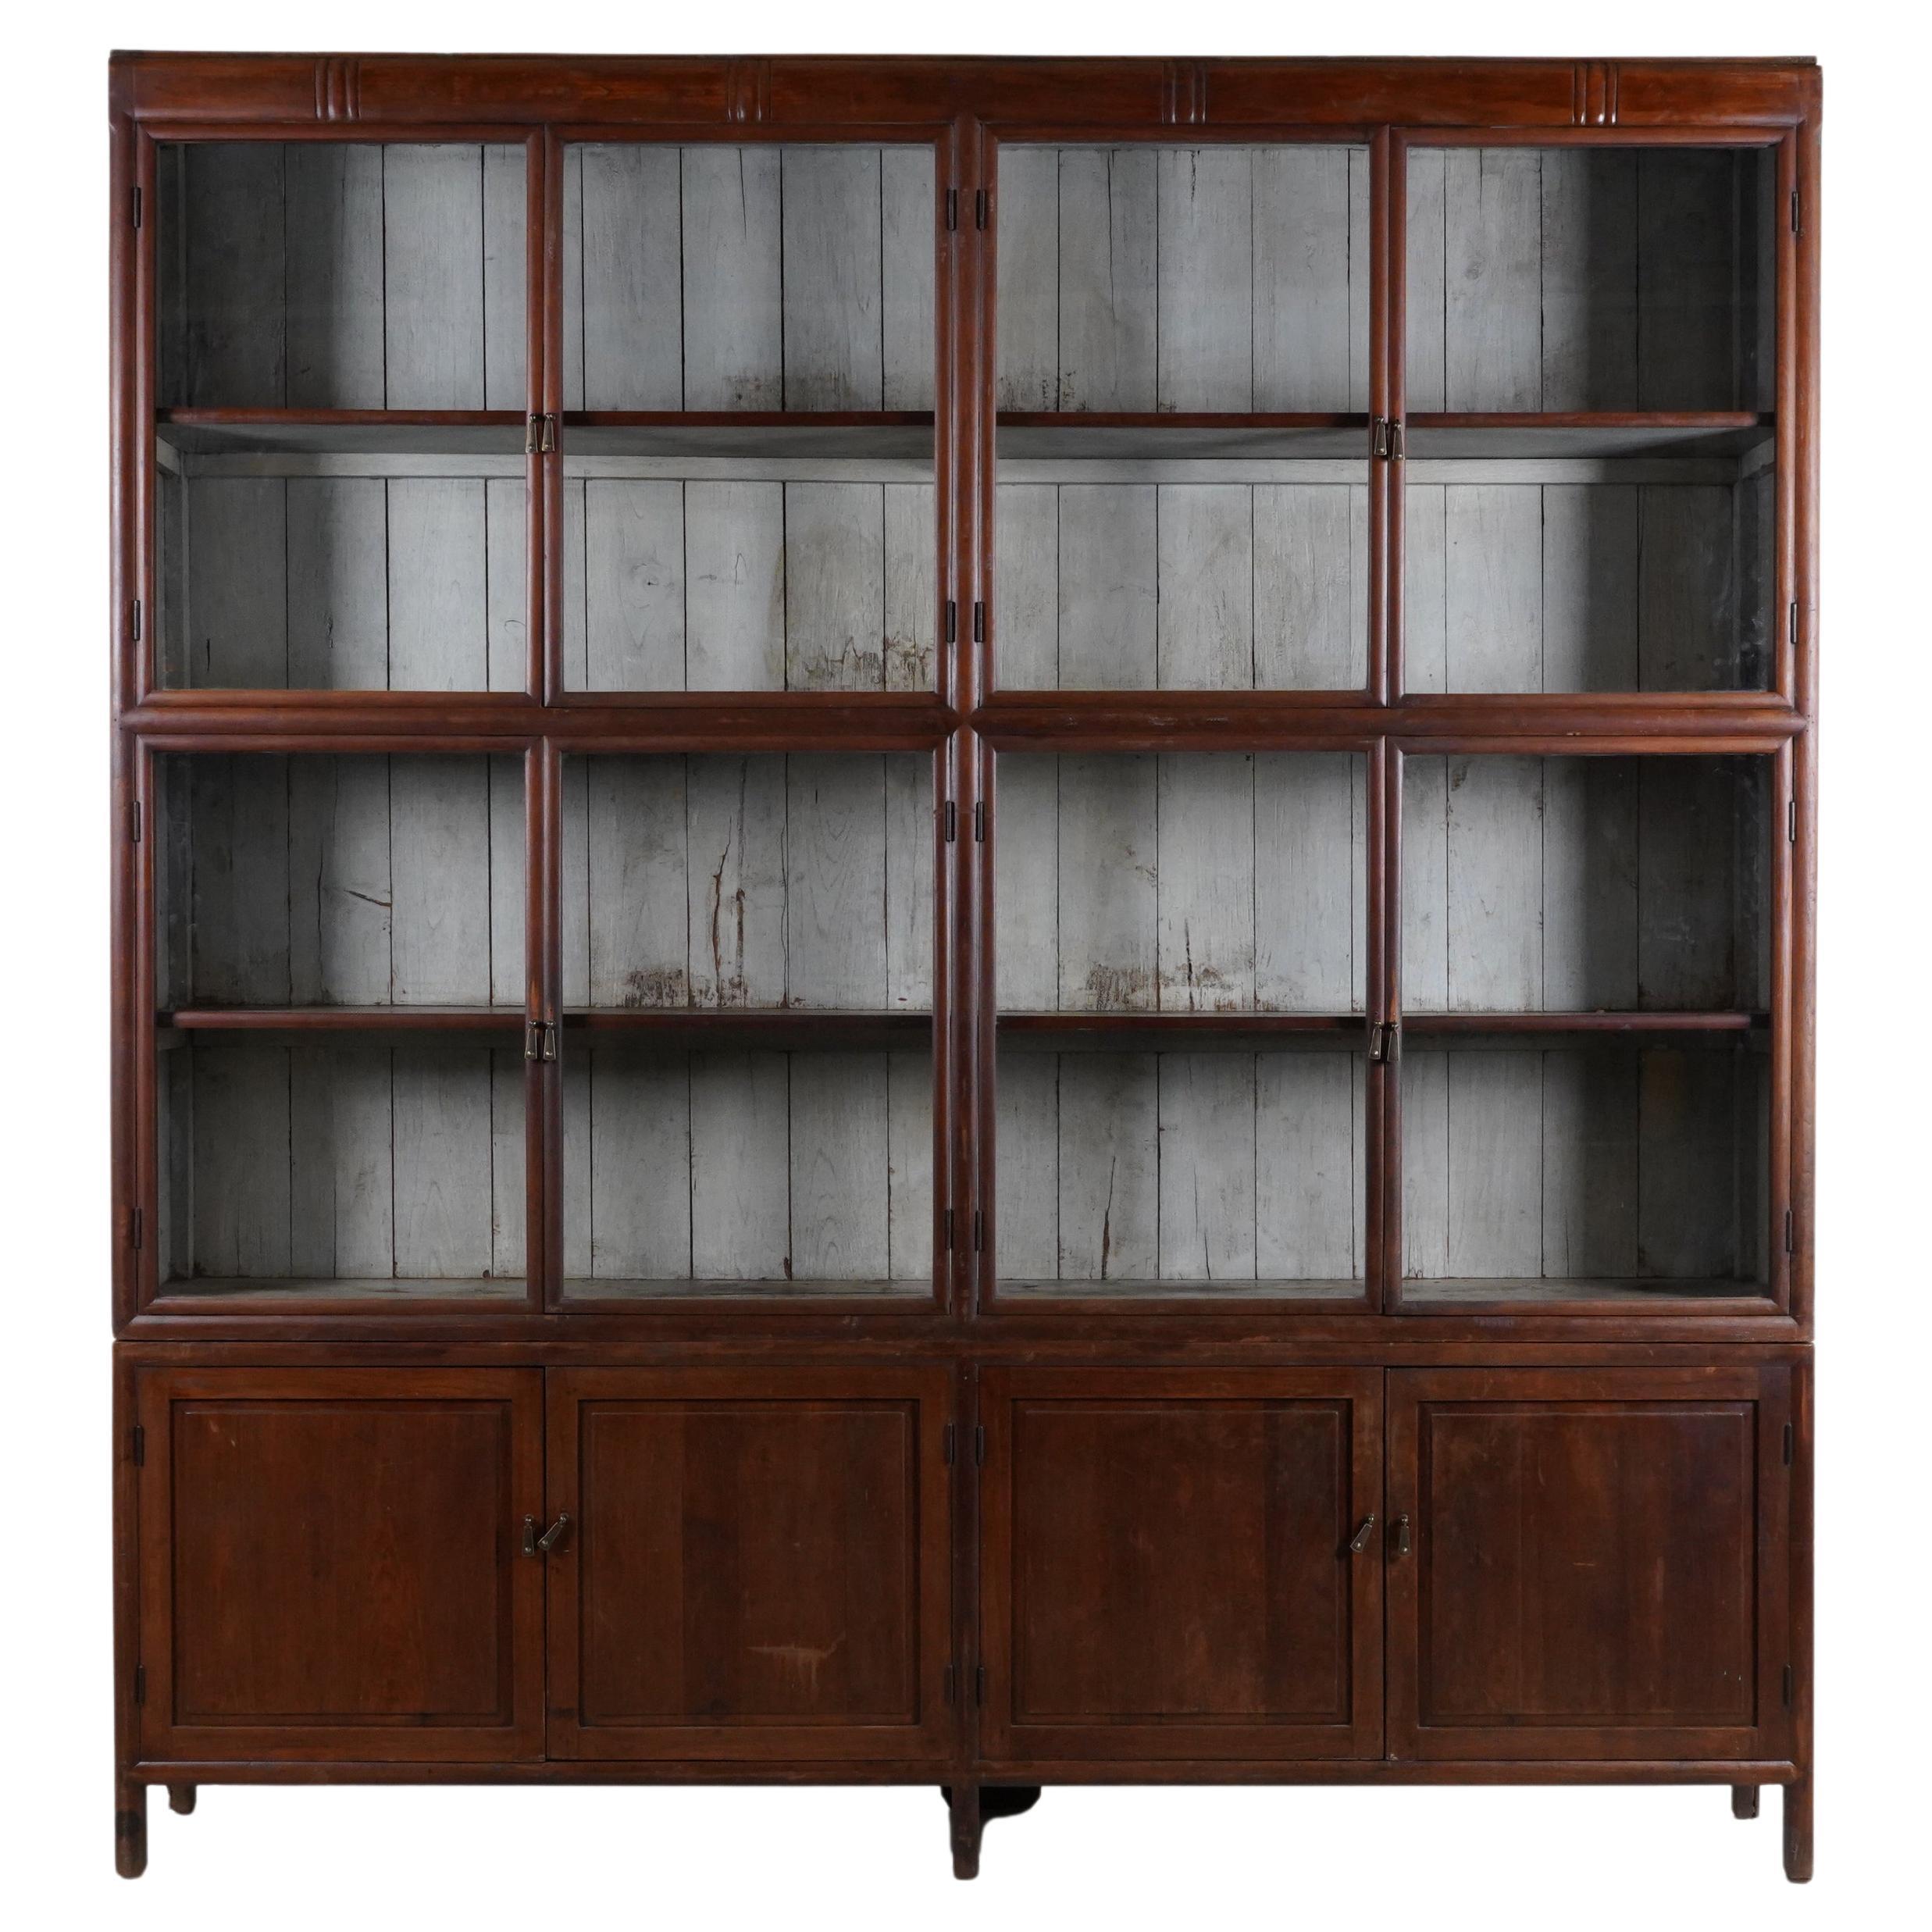 A British Colonial Art Deco Teak Bookcase with Lower Storage  For Sale